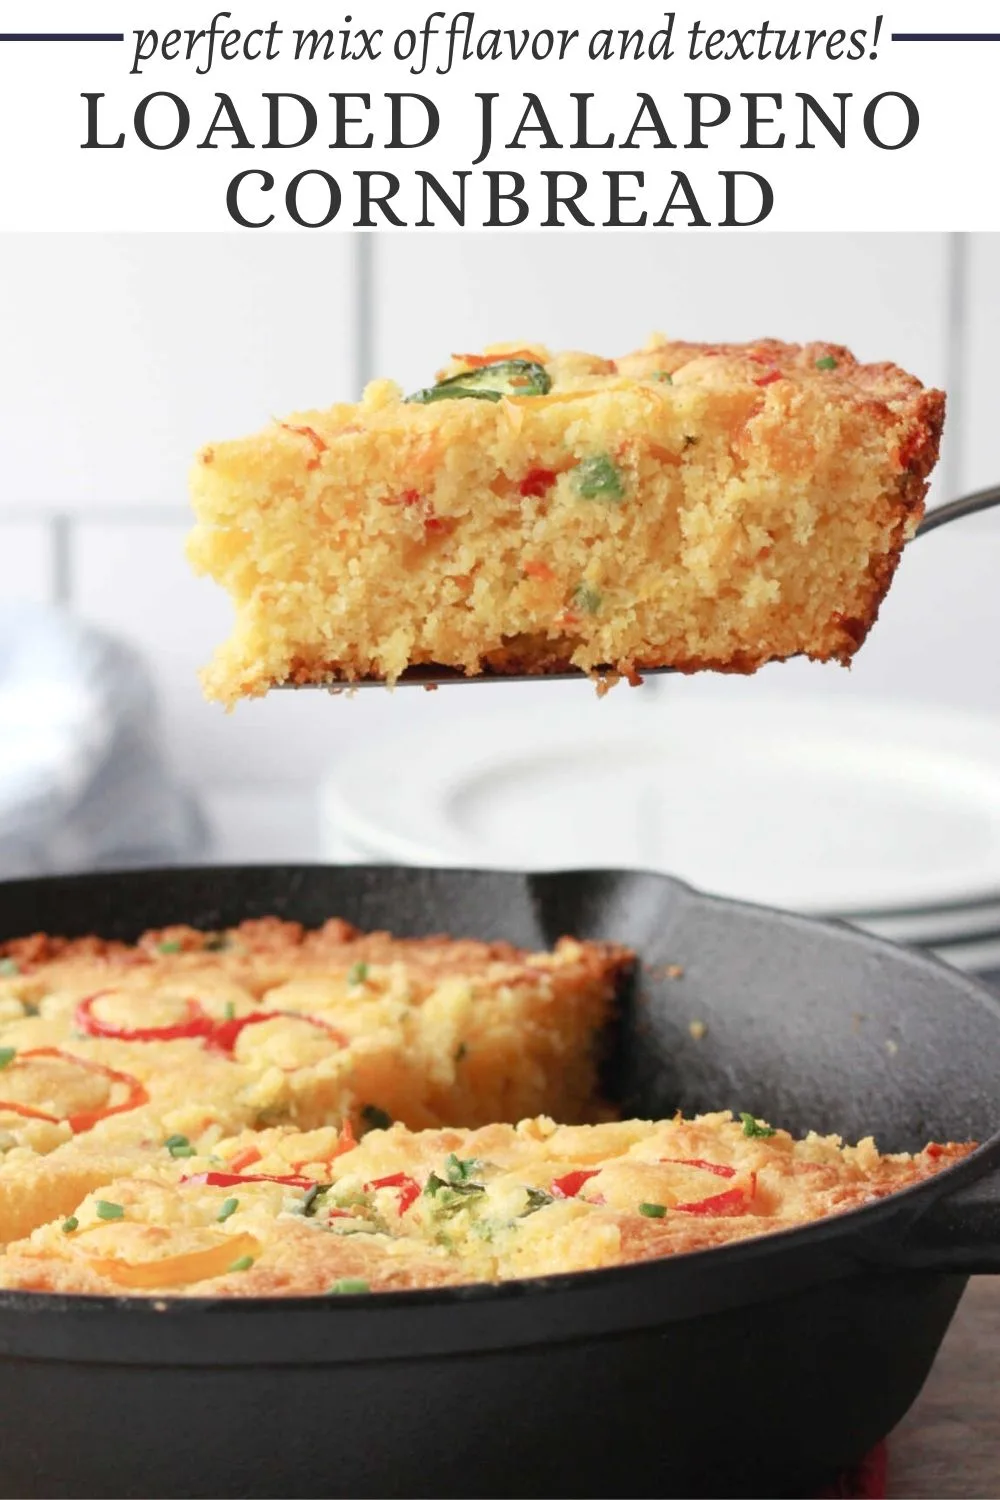 Loaded jalapeno cornbread has cheese, bacon and more packed inside. Using Jiffy cornbread mix makes it super simple to make and all of the extra flavorful ingredients make it out of this world delicious.